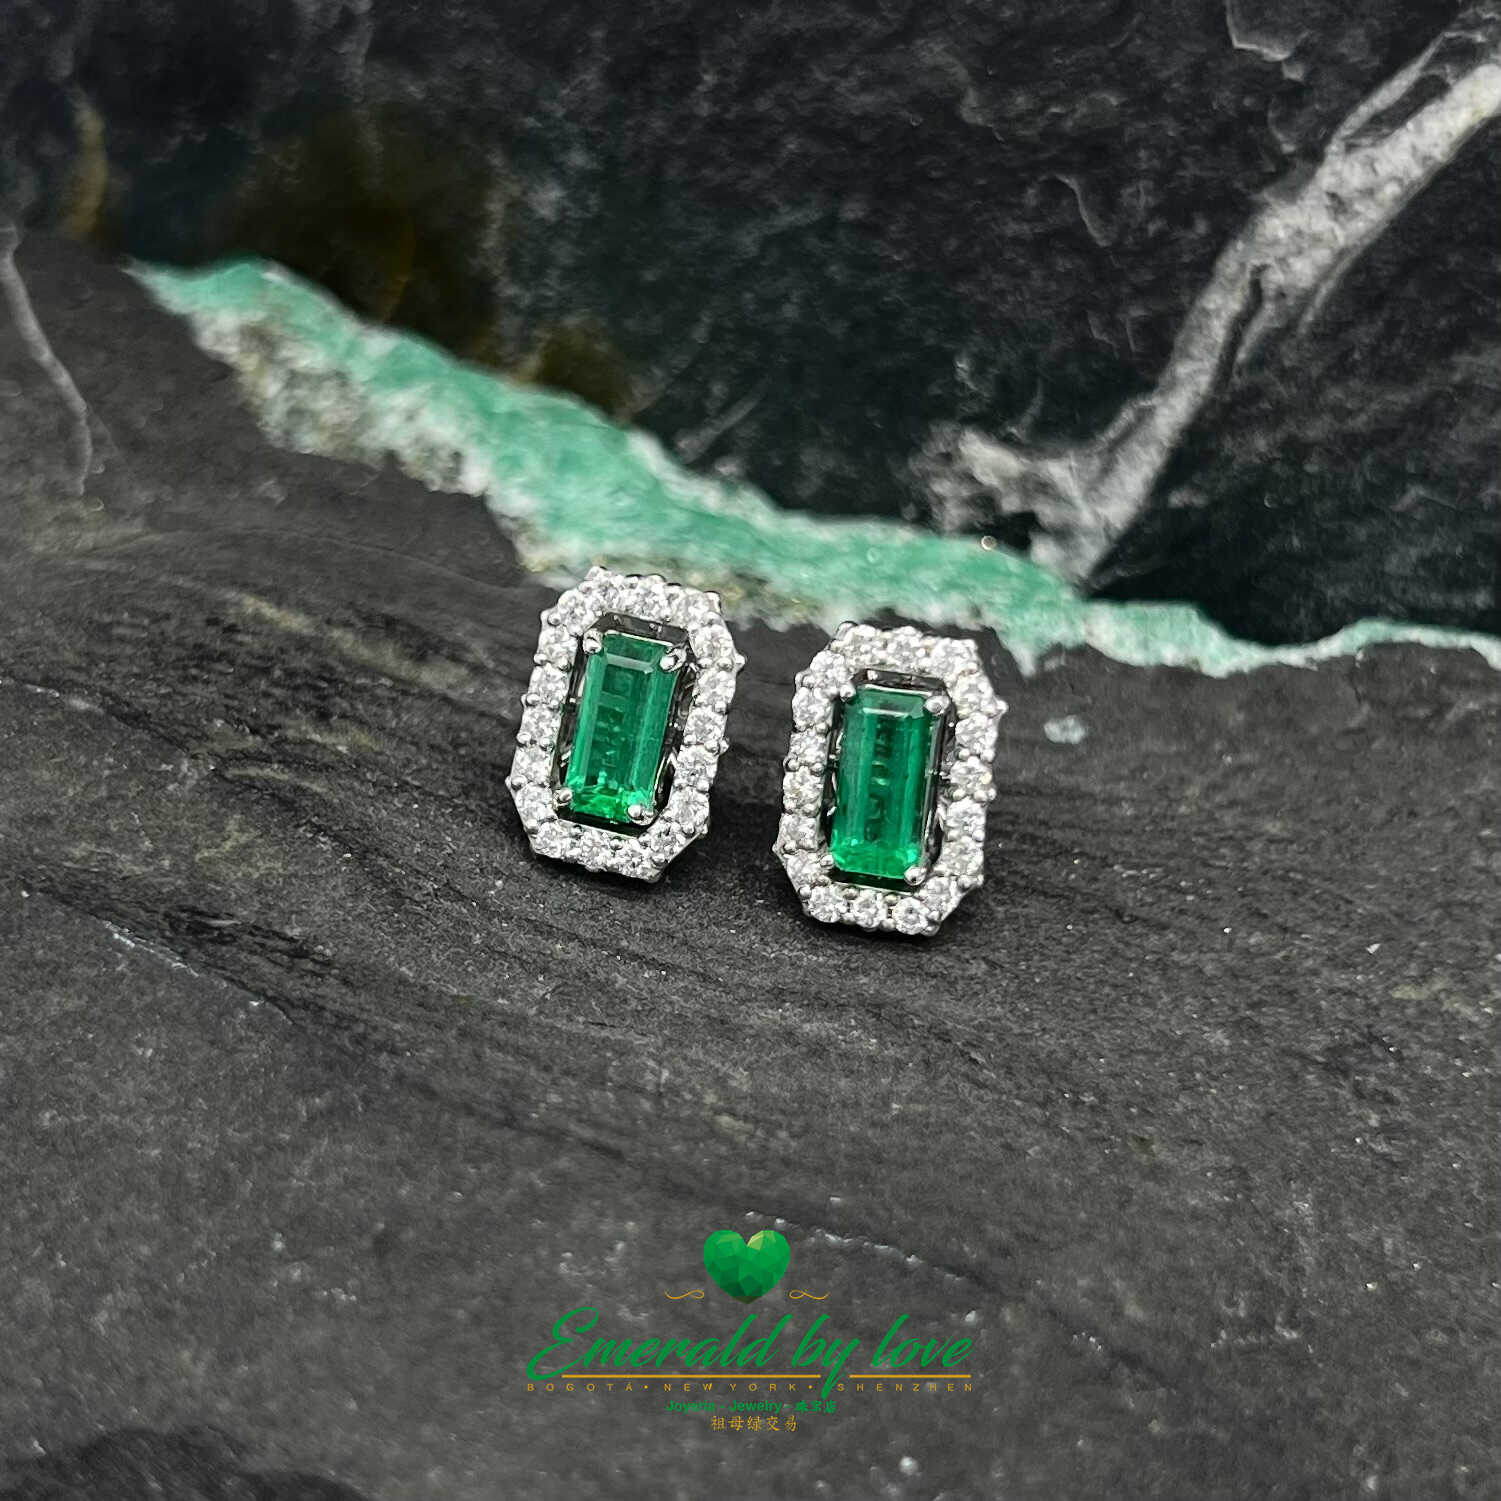 Pure Radiance: 18k White Gold Earrings with Colombian Emeralds and Diamonds